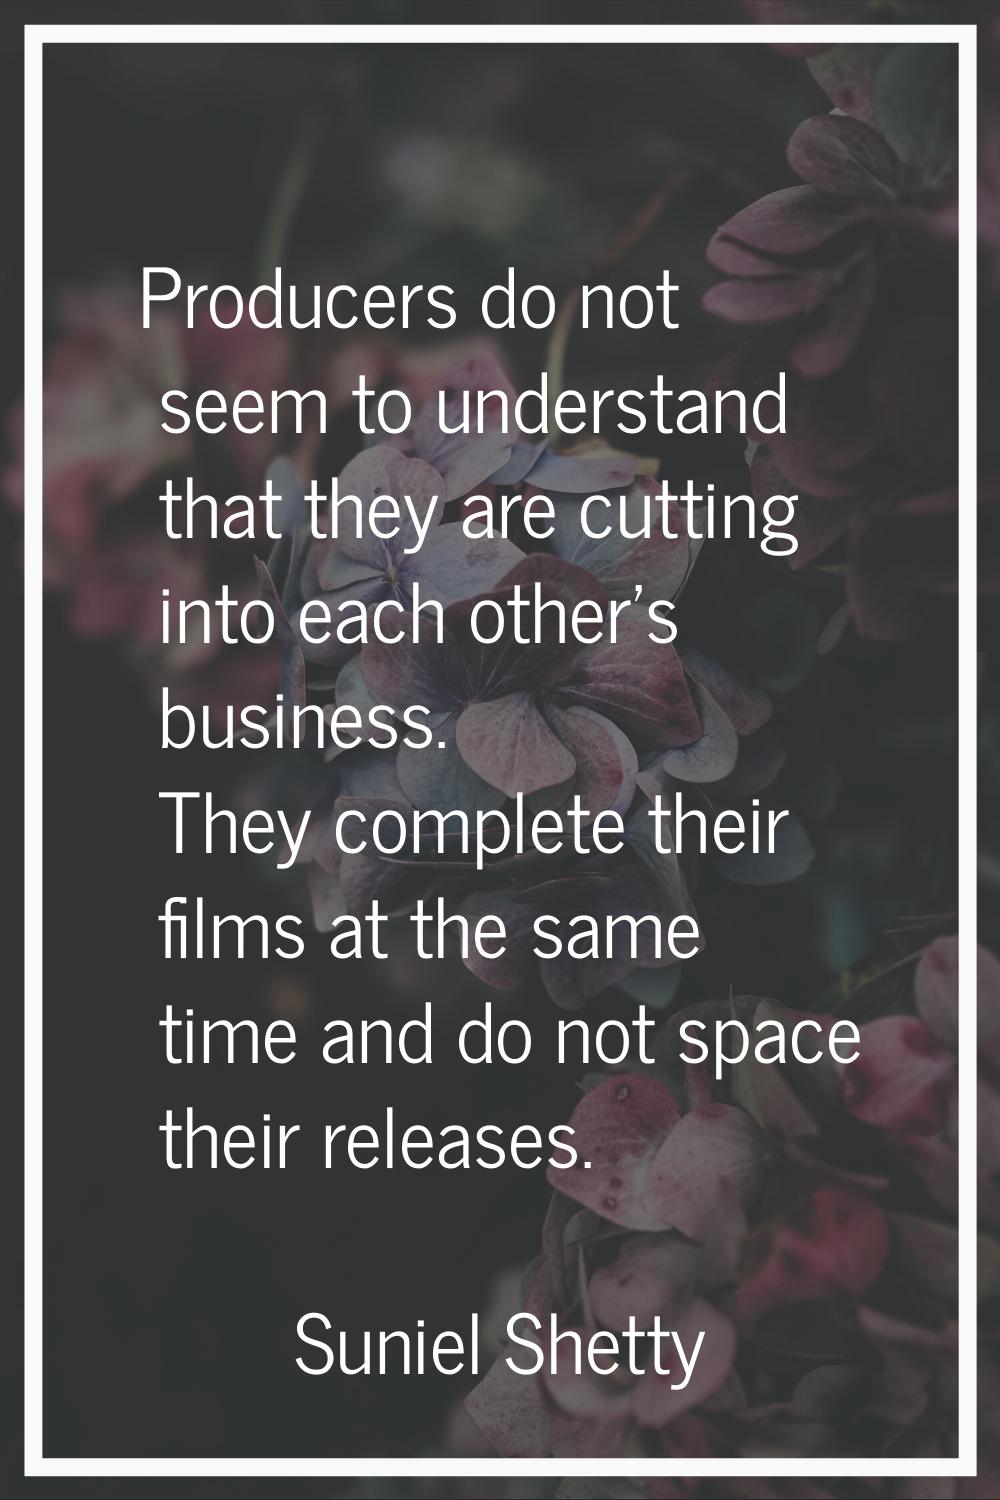 Producers do not seem to understand that they are cutting into each other's business. They complete